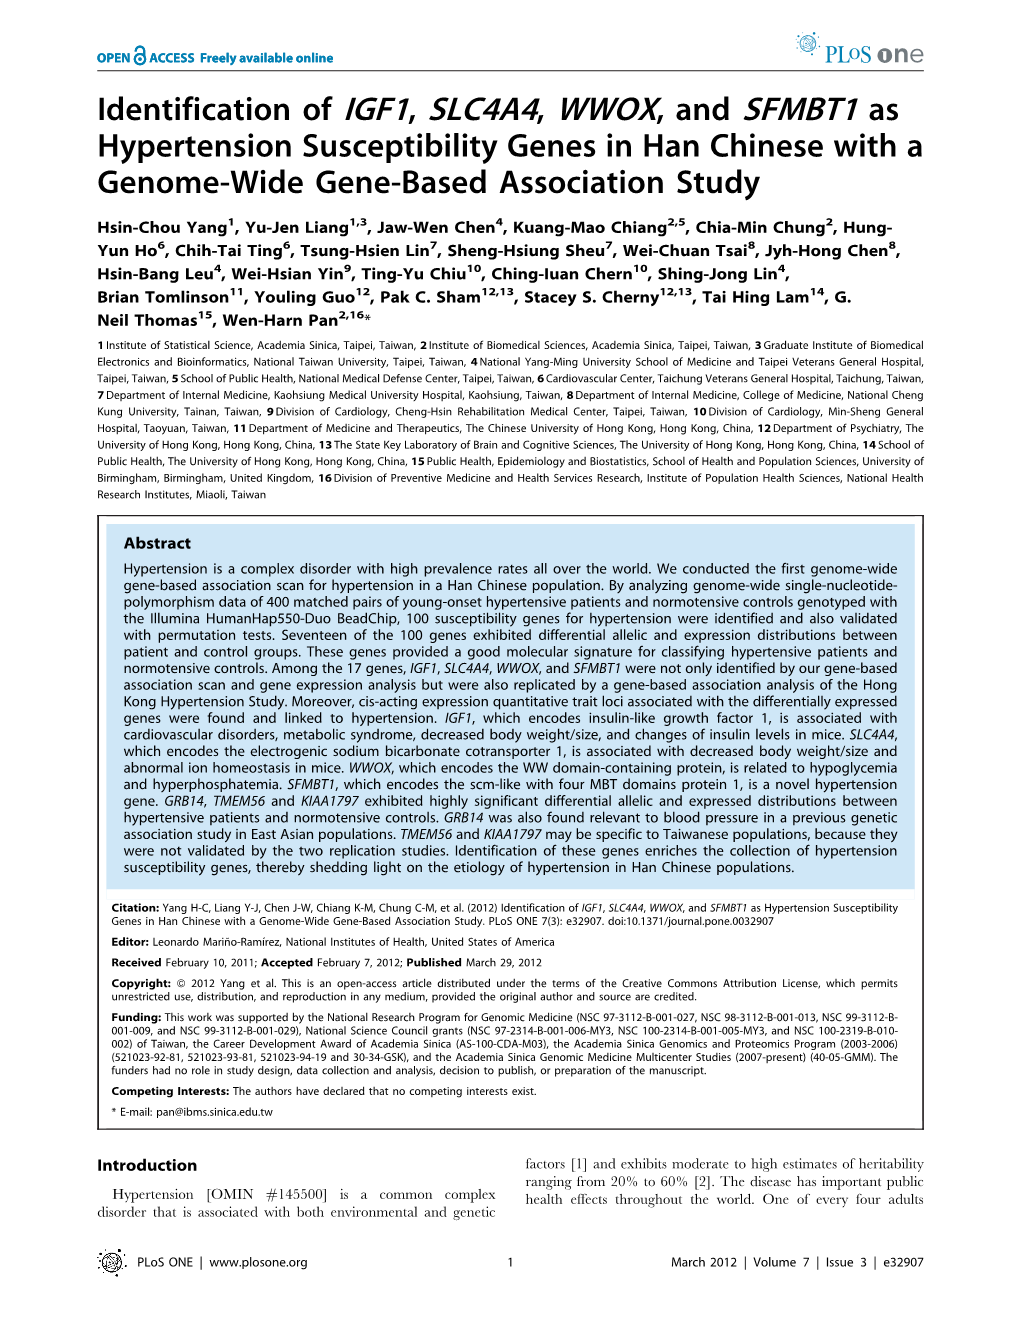 Identification of IGF1, SLC4A4, WWOX, and SFMBT1 As Hypertension Susceptibility Genes in Han Chinese with a Genome-Wide Gene-Based Association Study